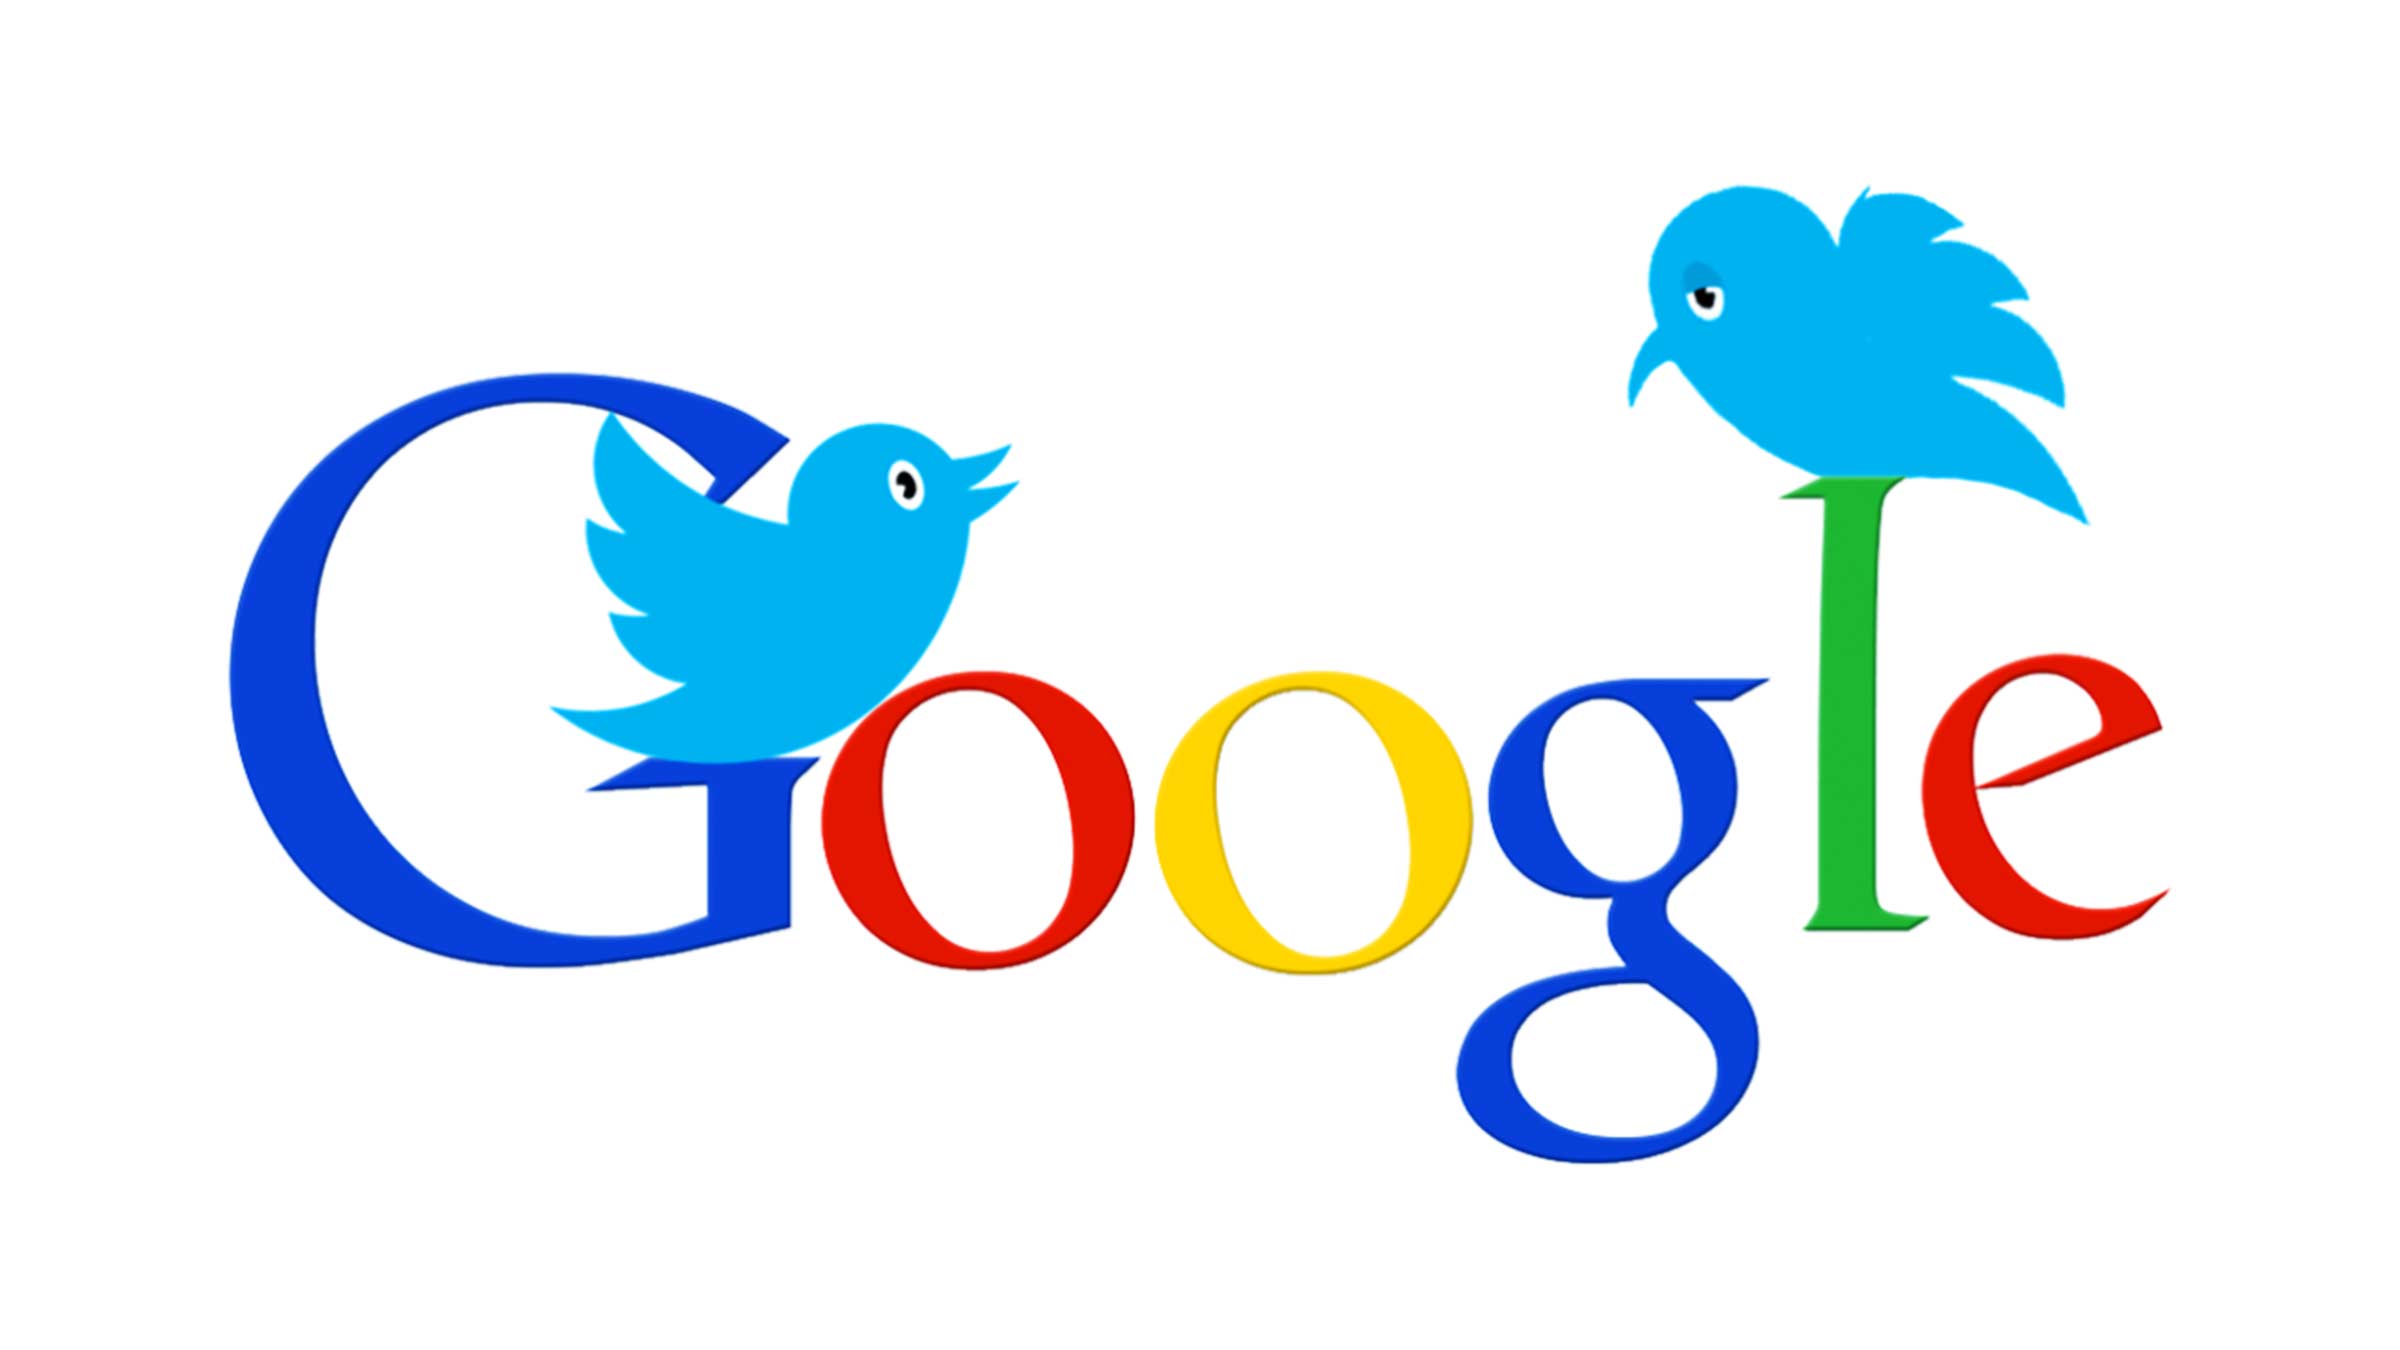 Google acquiring Twitter: as mad as it sounds?